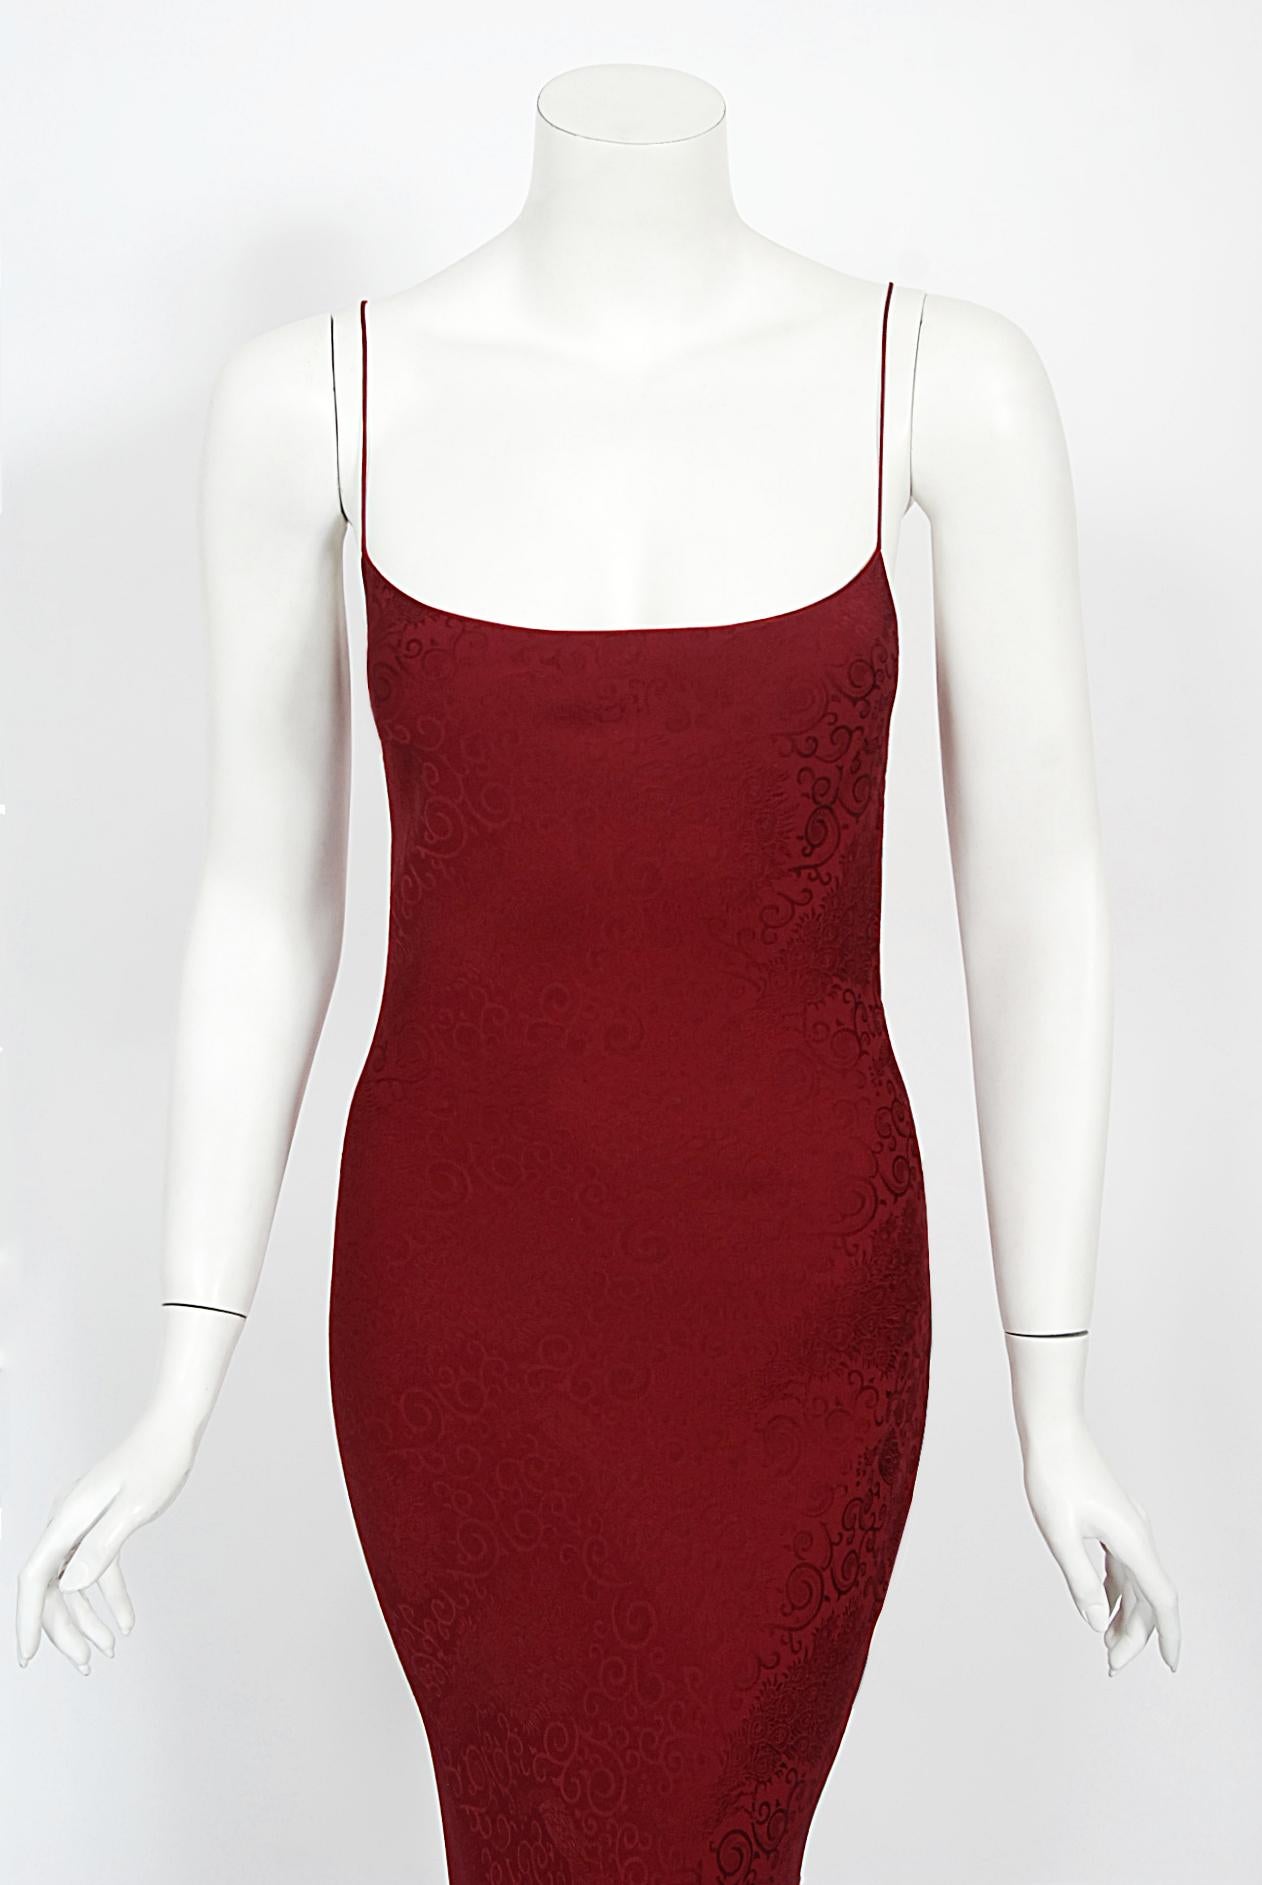 An incredibly chic and highly coveted early John Galliano wine-red peacock patterned stretch silk bias cut slip gown dating back to his spring/summer 1998 collection. These early examples of his work are very collectable and are becoming incredibly